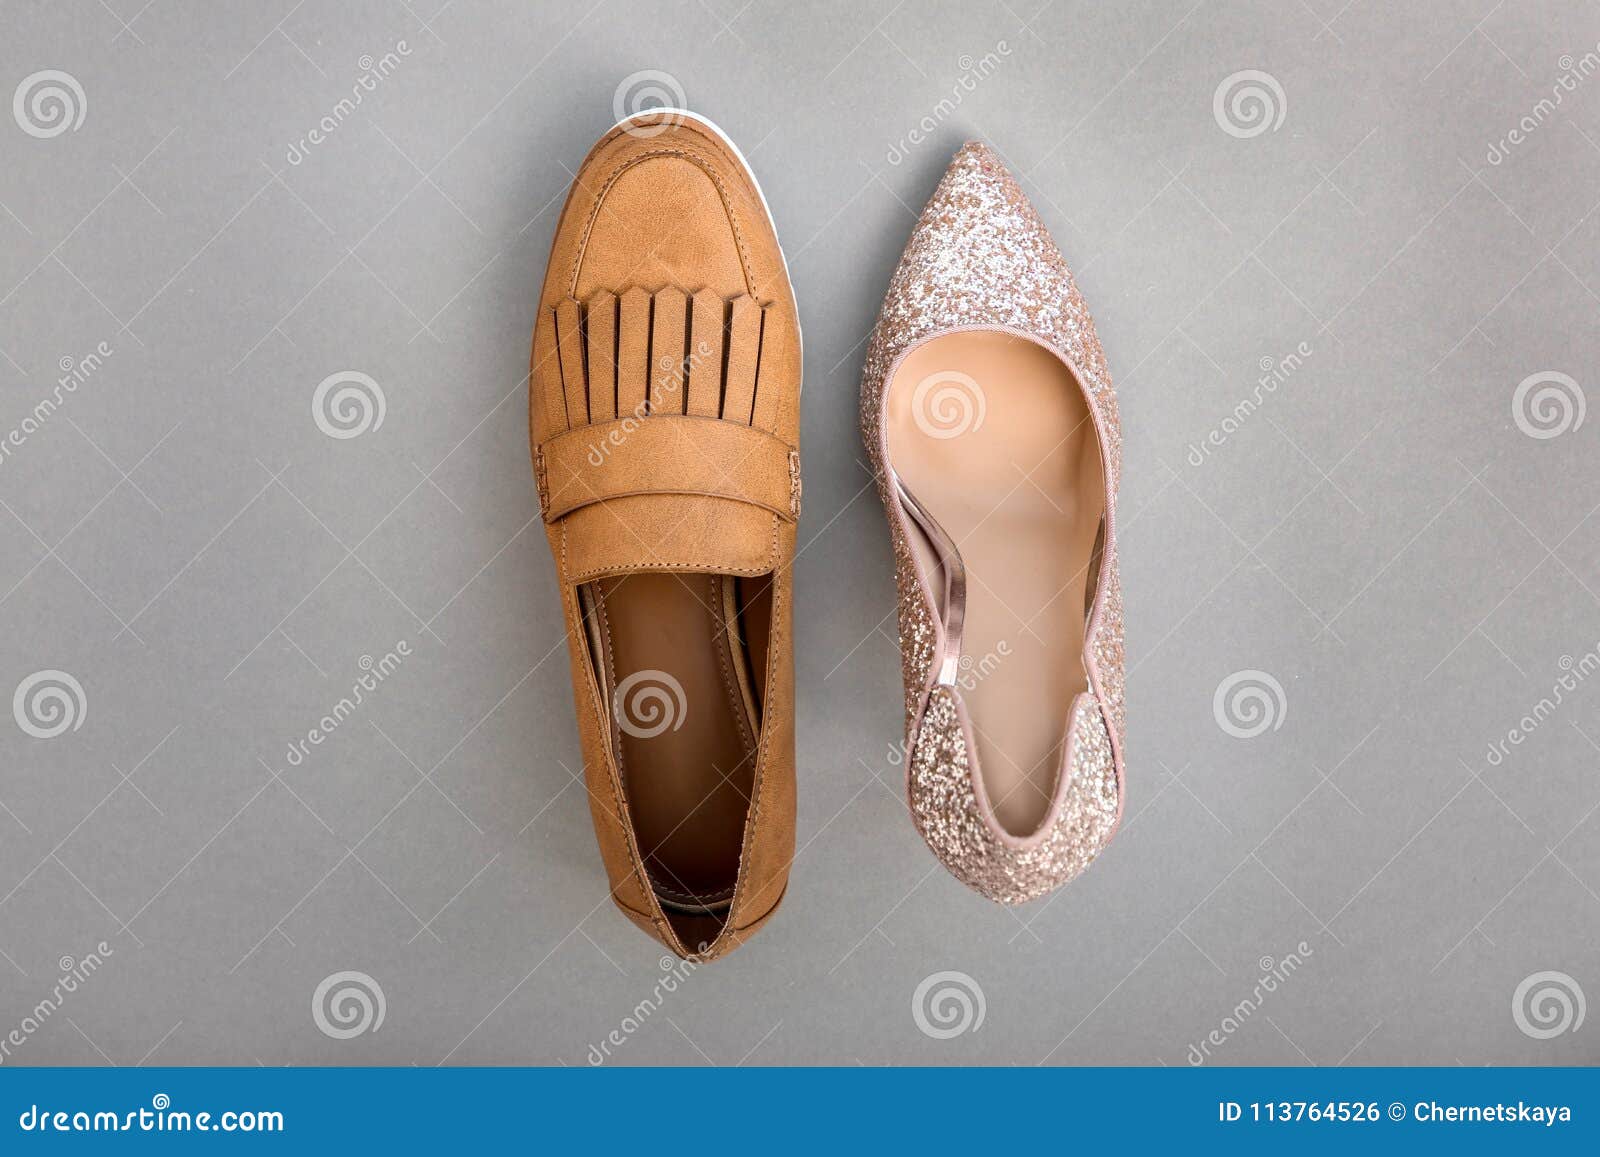 Different female shoes stock photo. Image of high, modern - 113764526